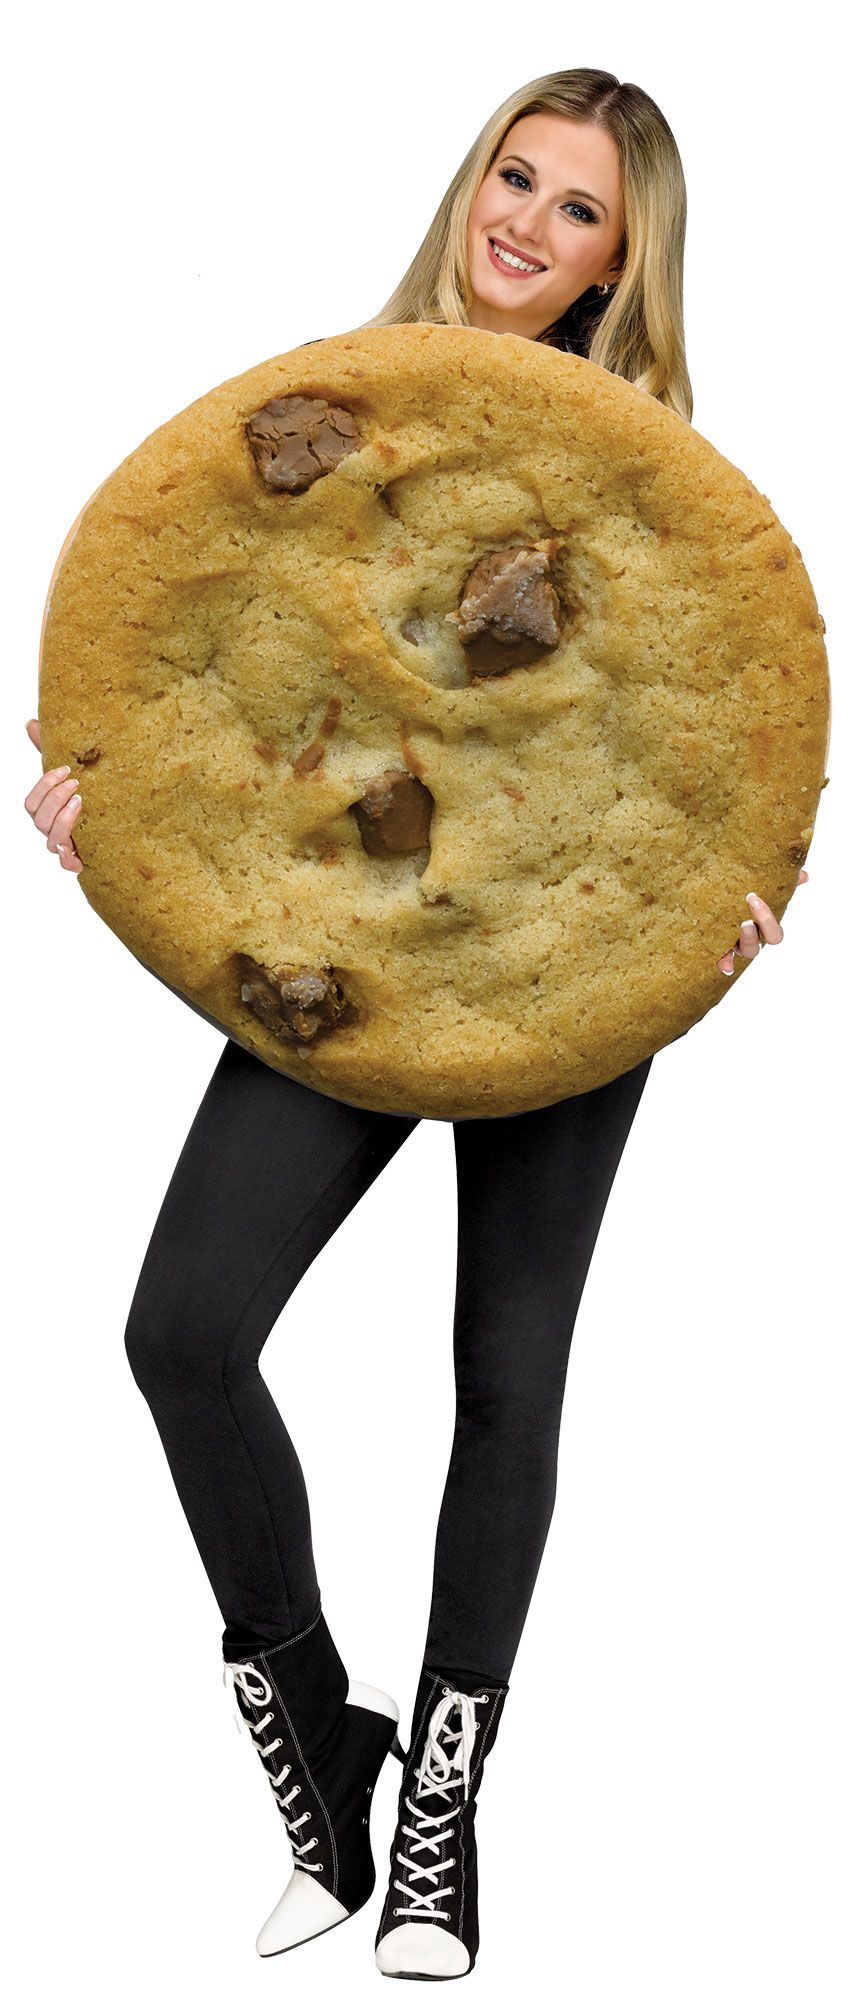 Milk and Cookies Couples Costume